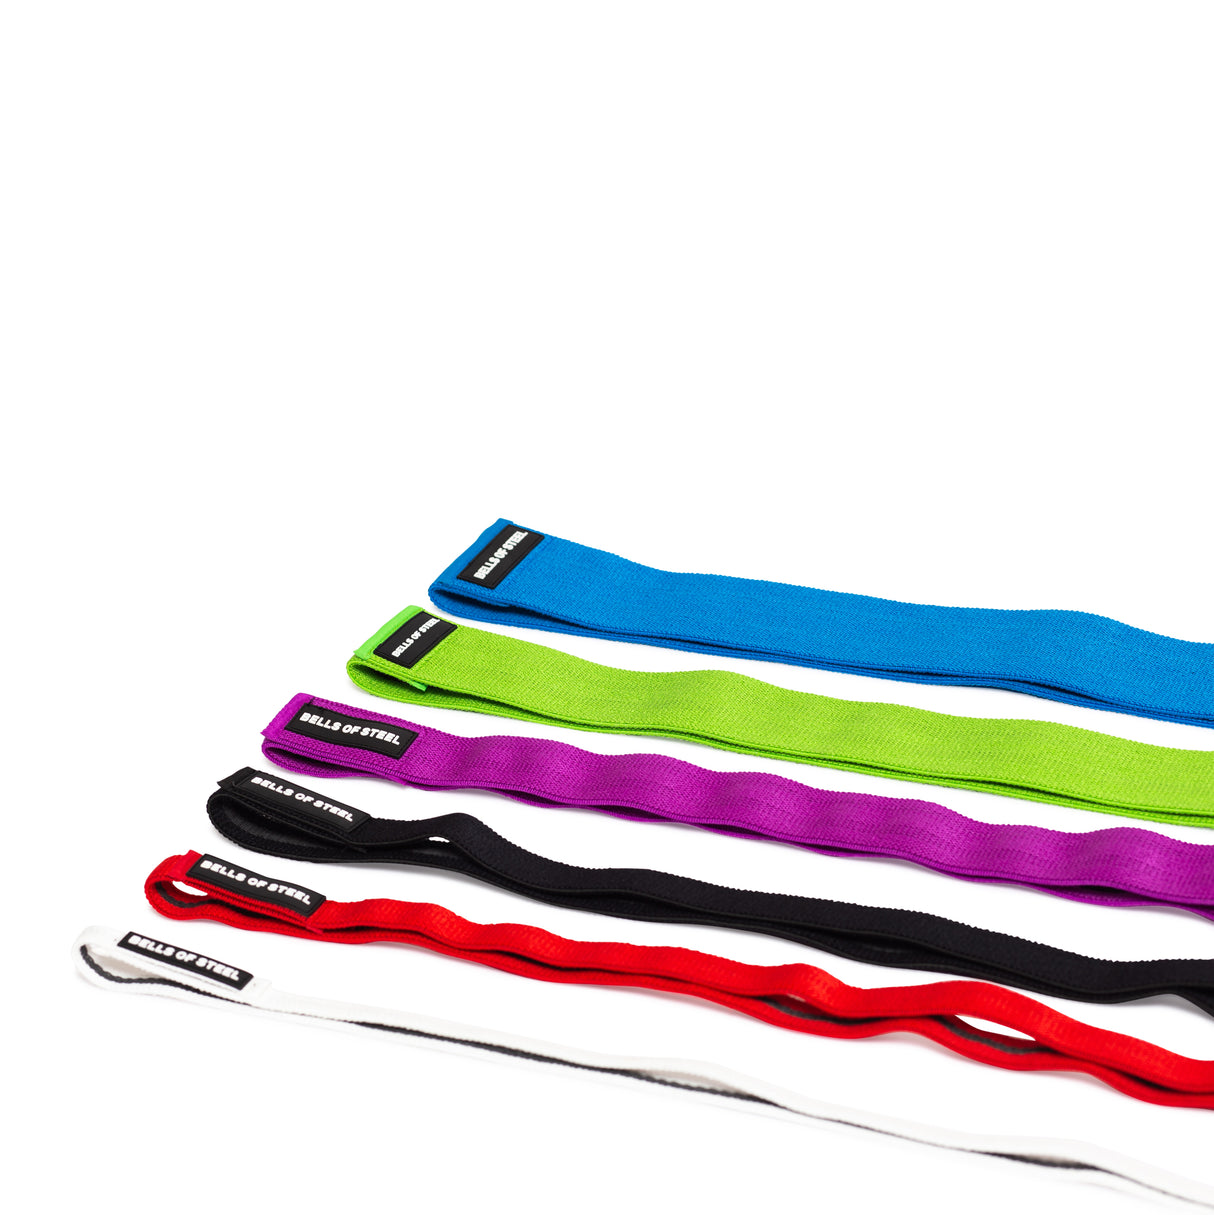 Fabric Non-Slip Resistance Bands (41") - Ultimate Set side view